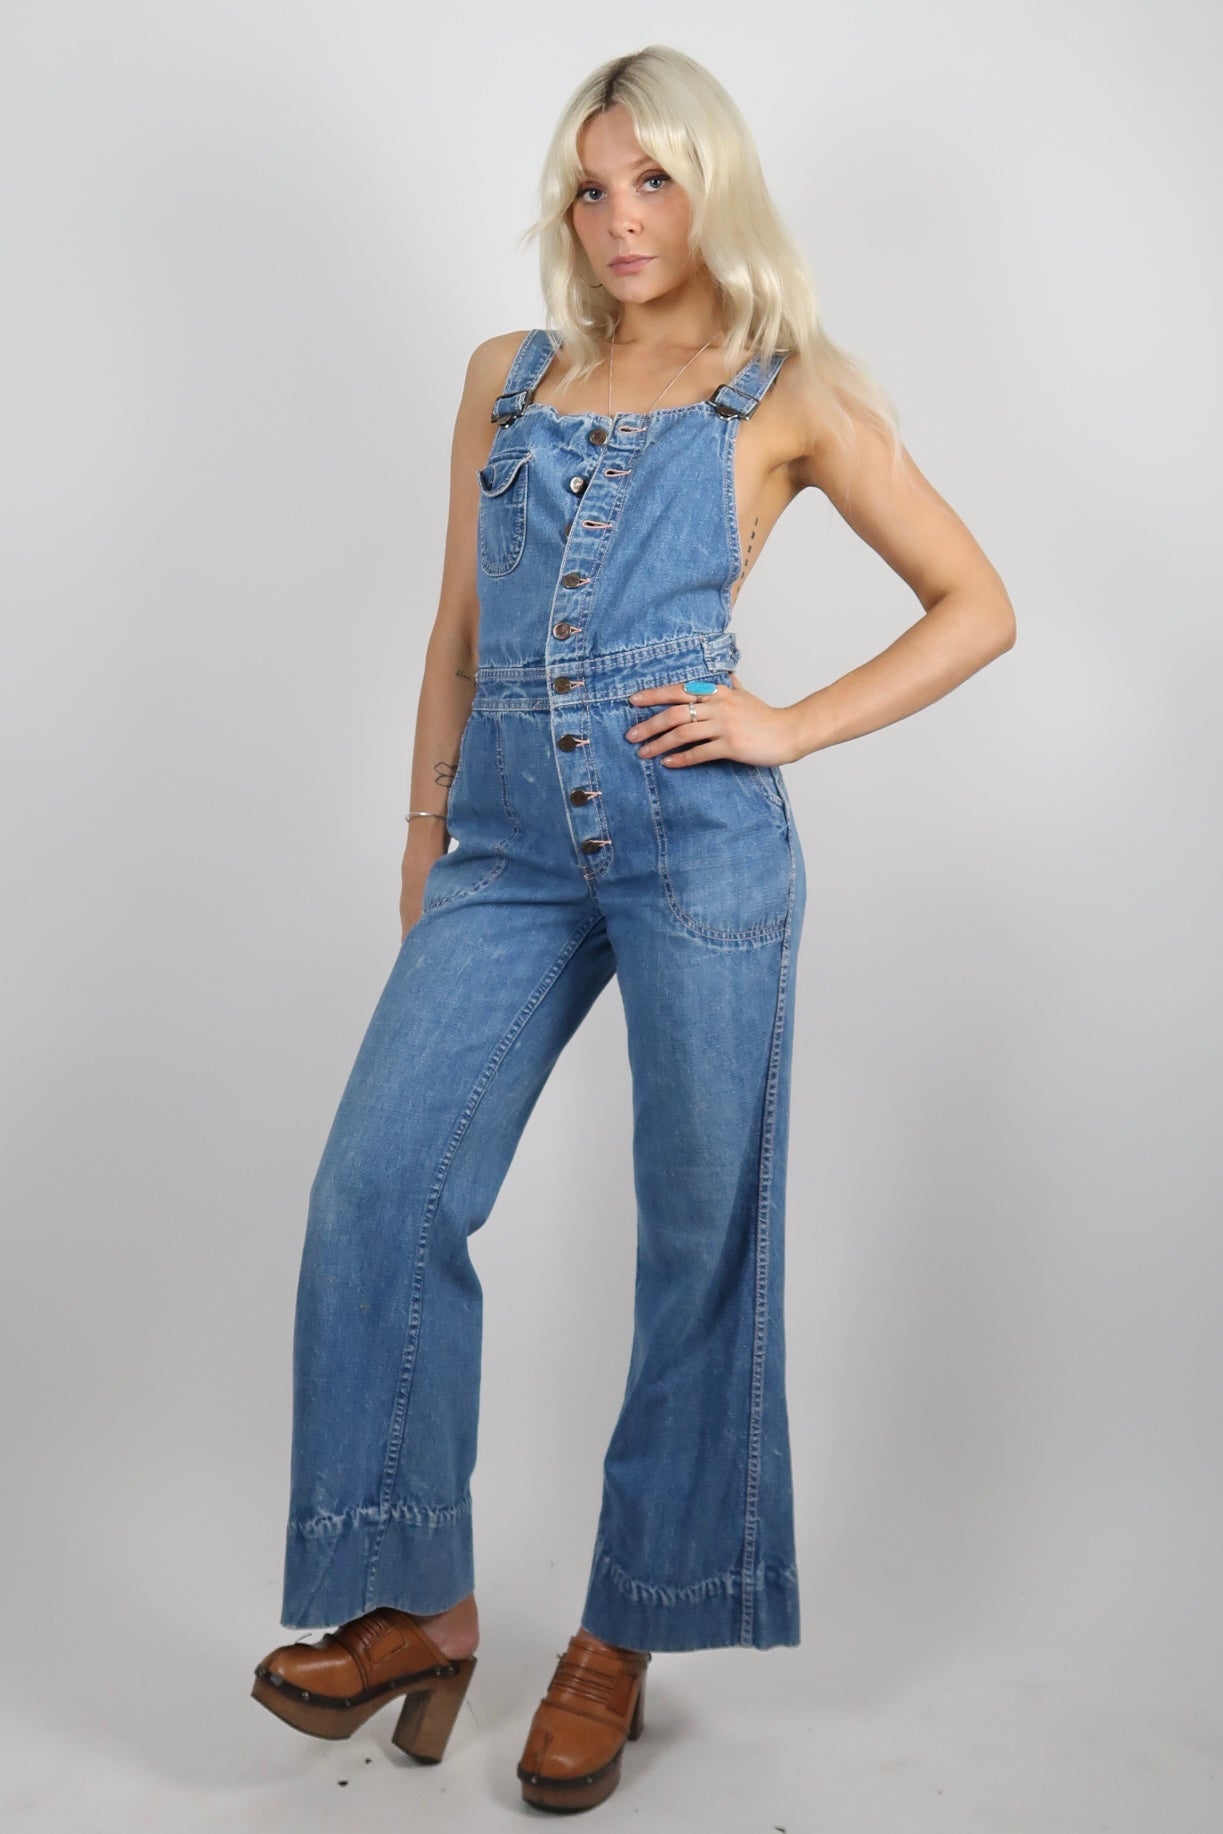 1970s dungaree overalls